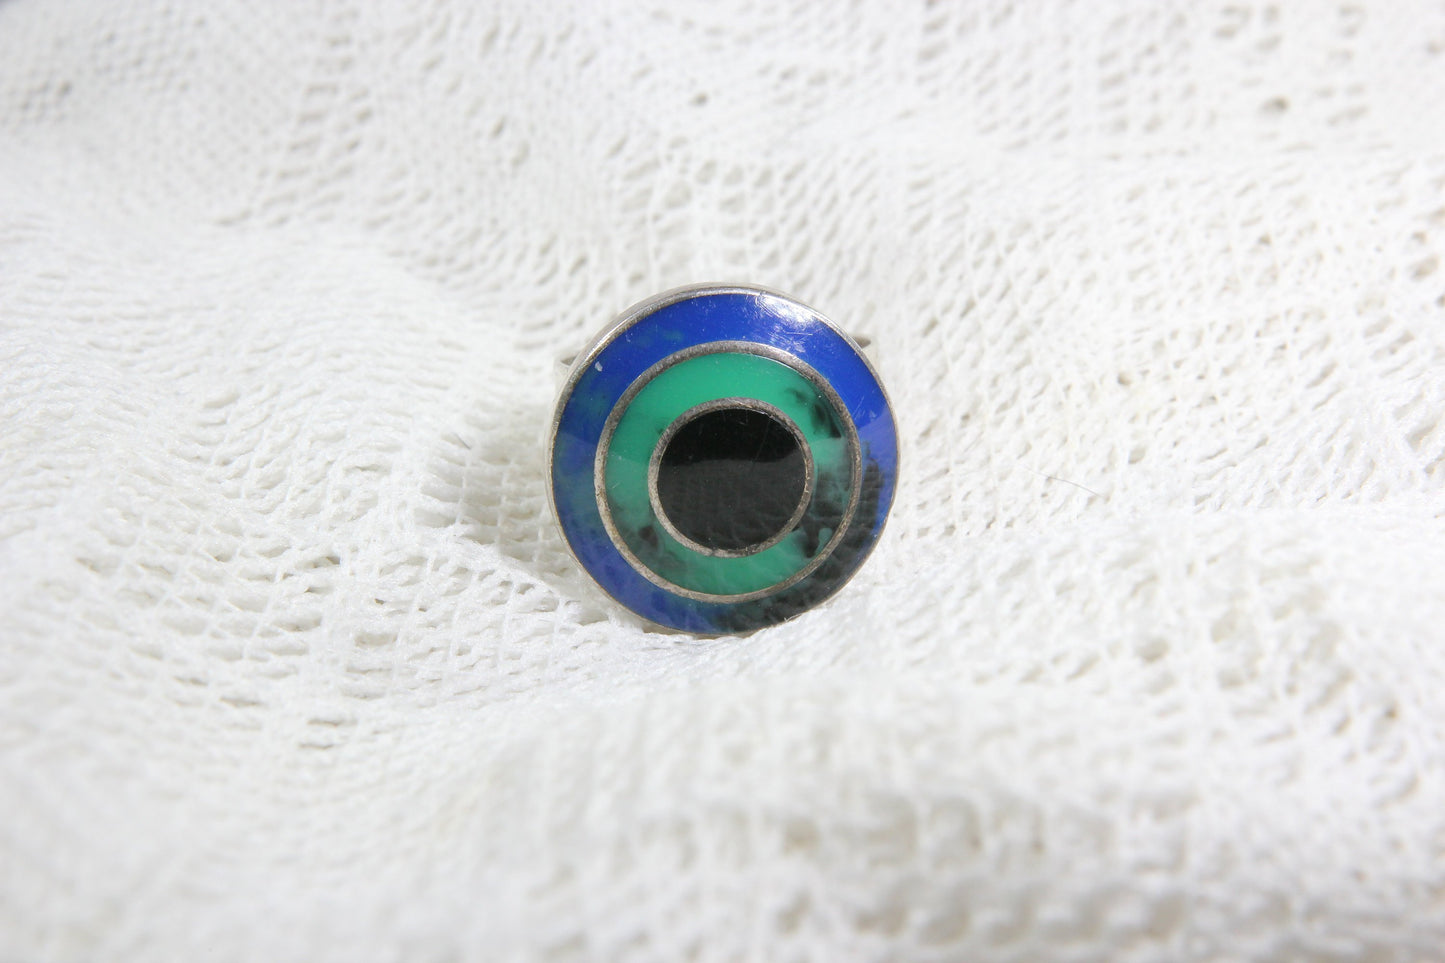 Israel Sterling Silver Ring with Blue Green and Black Target Design, Size 9.5